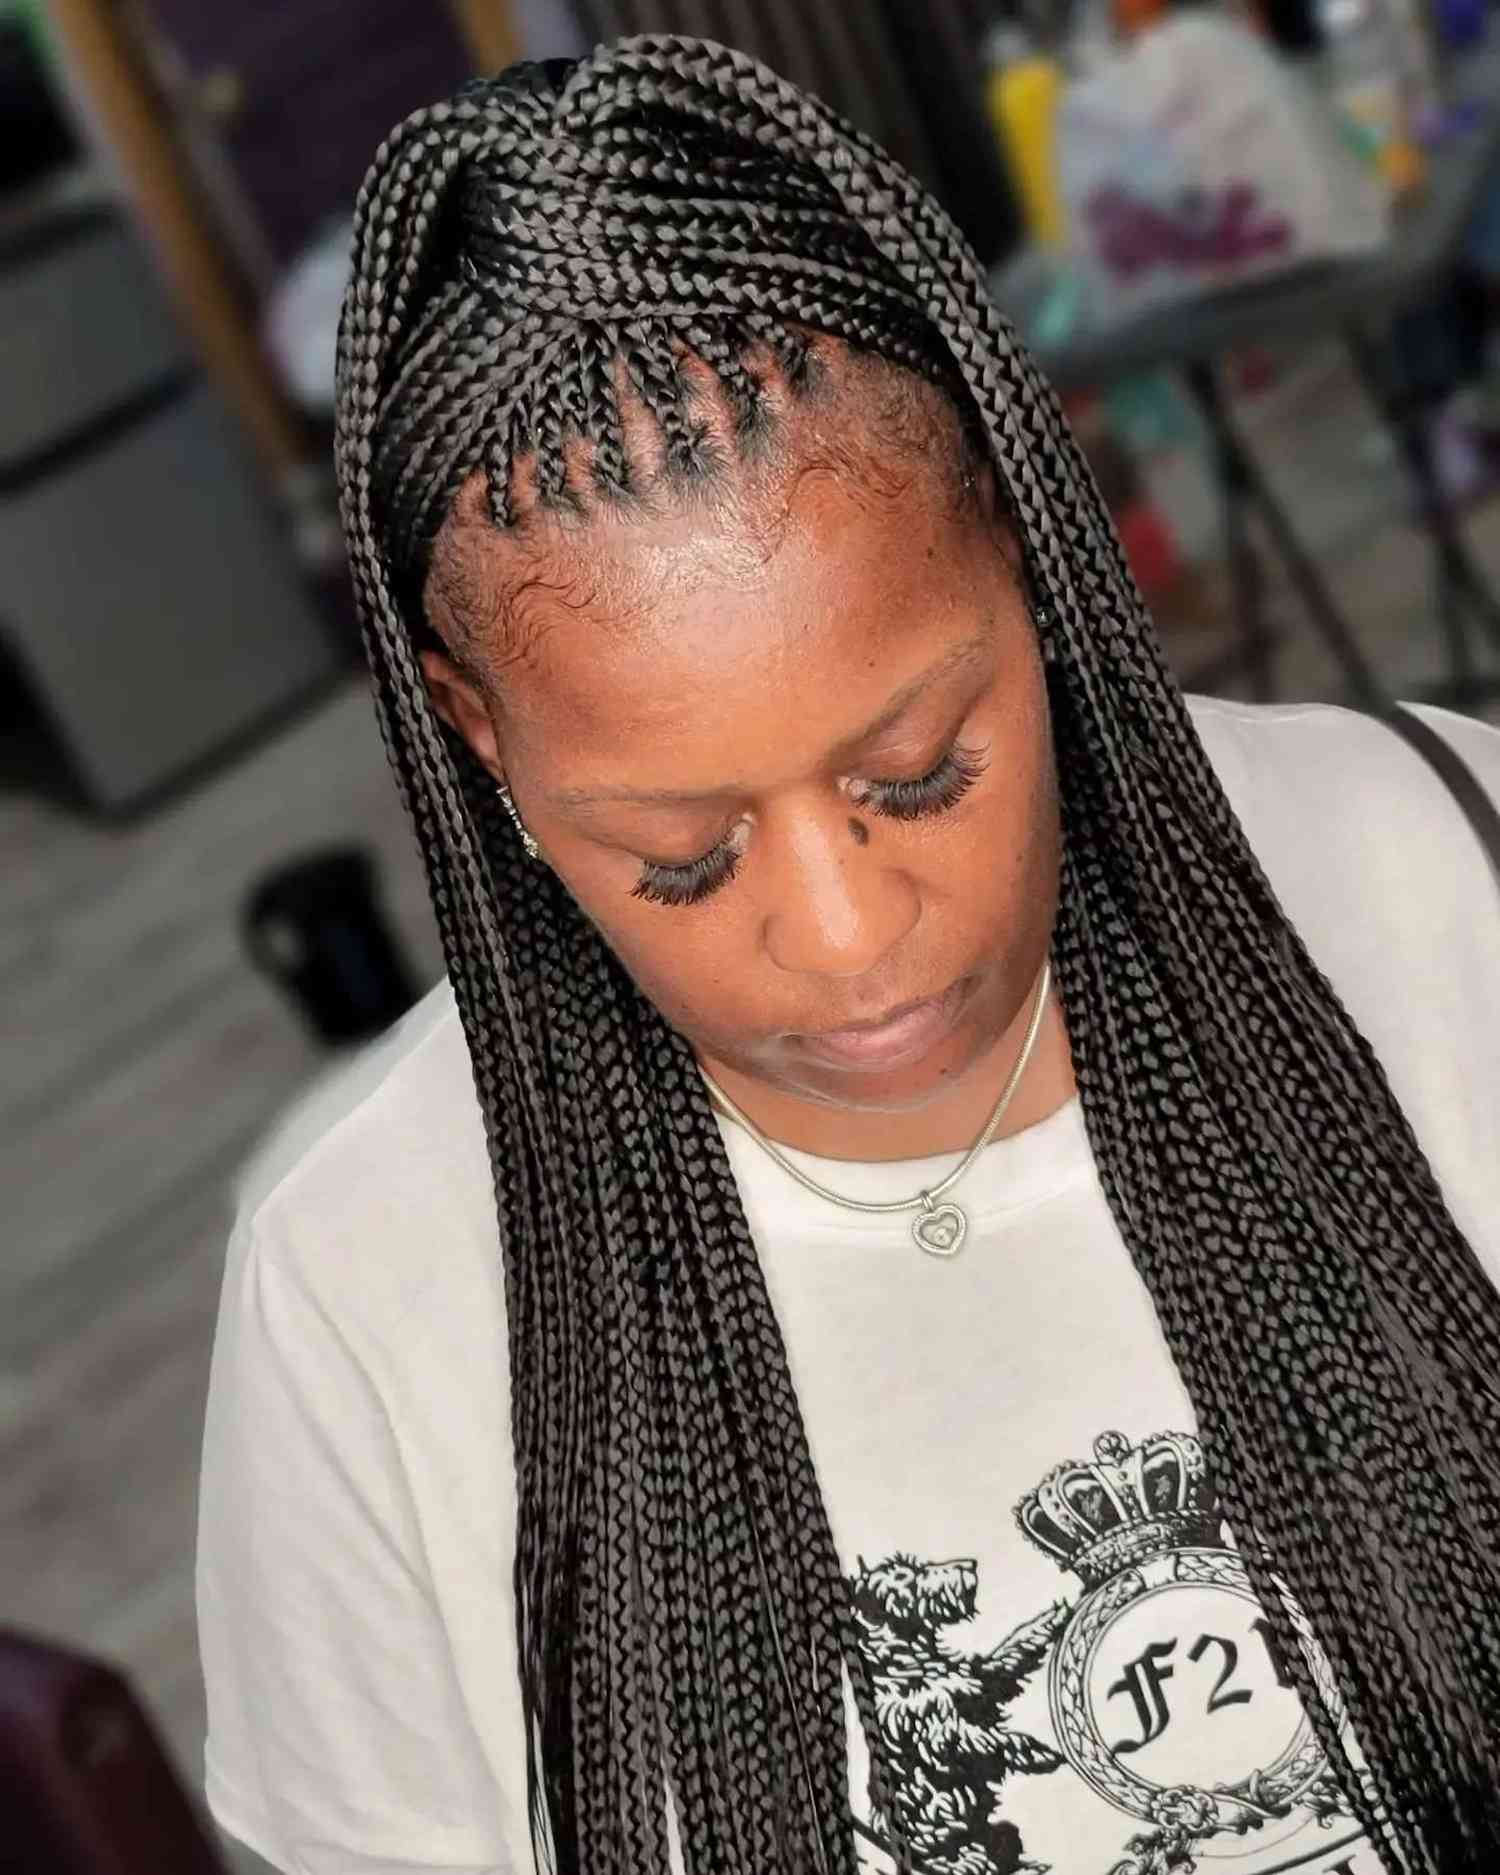 Knotless braids in a twisted high ponytail